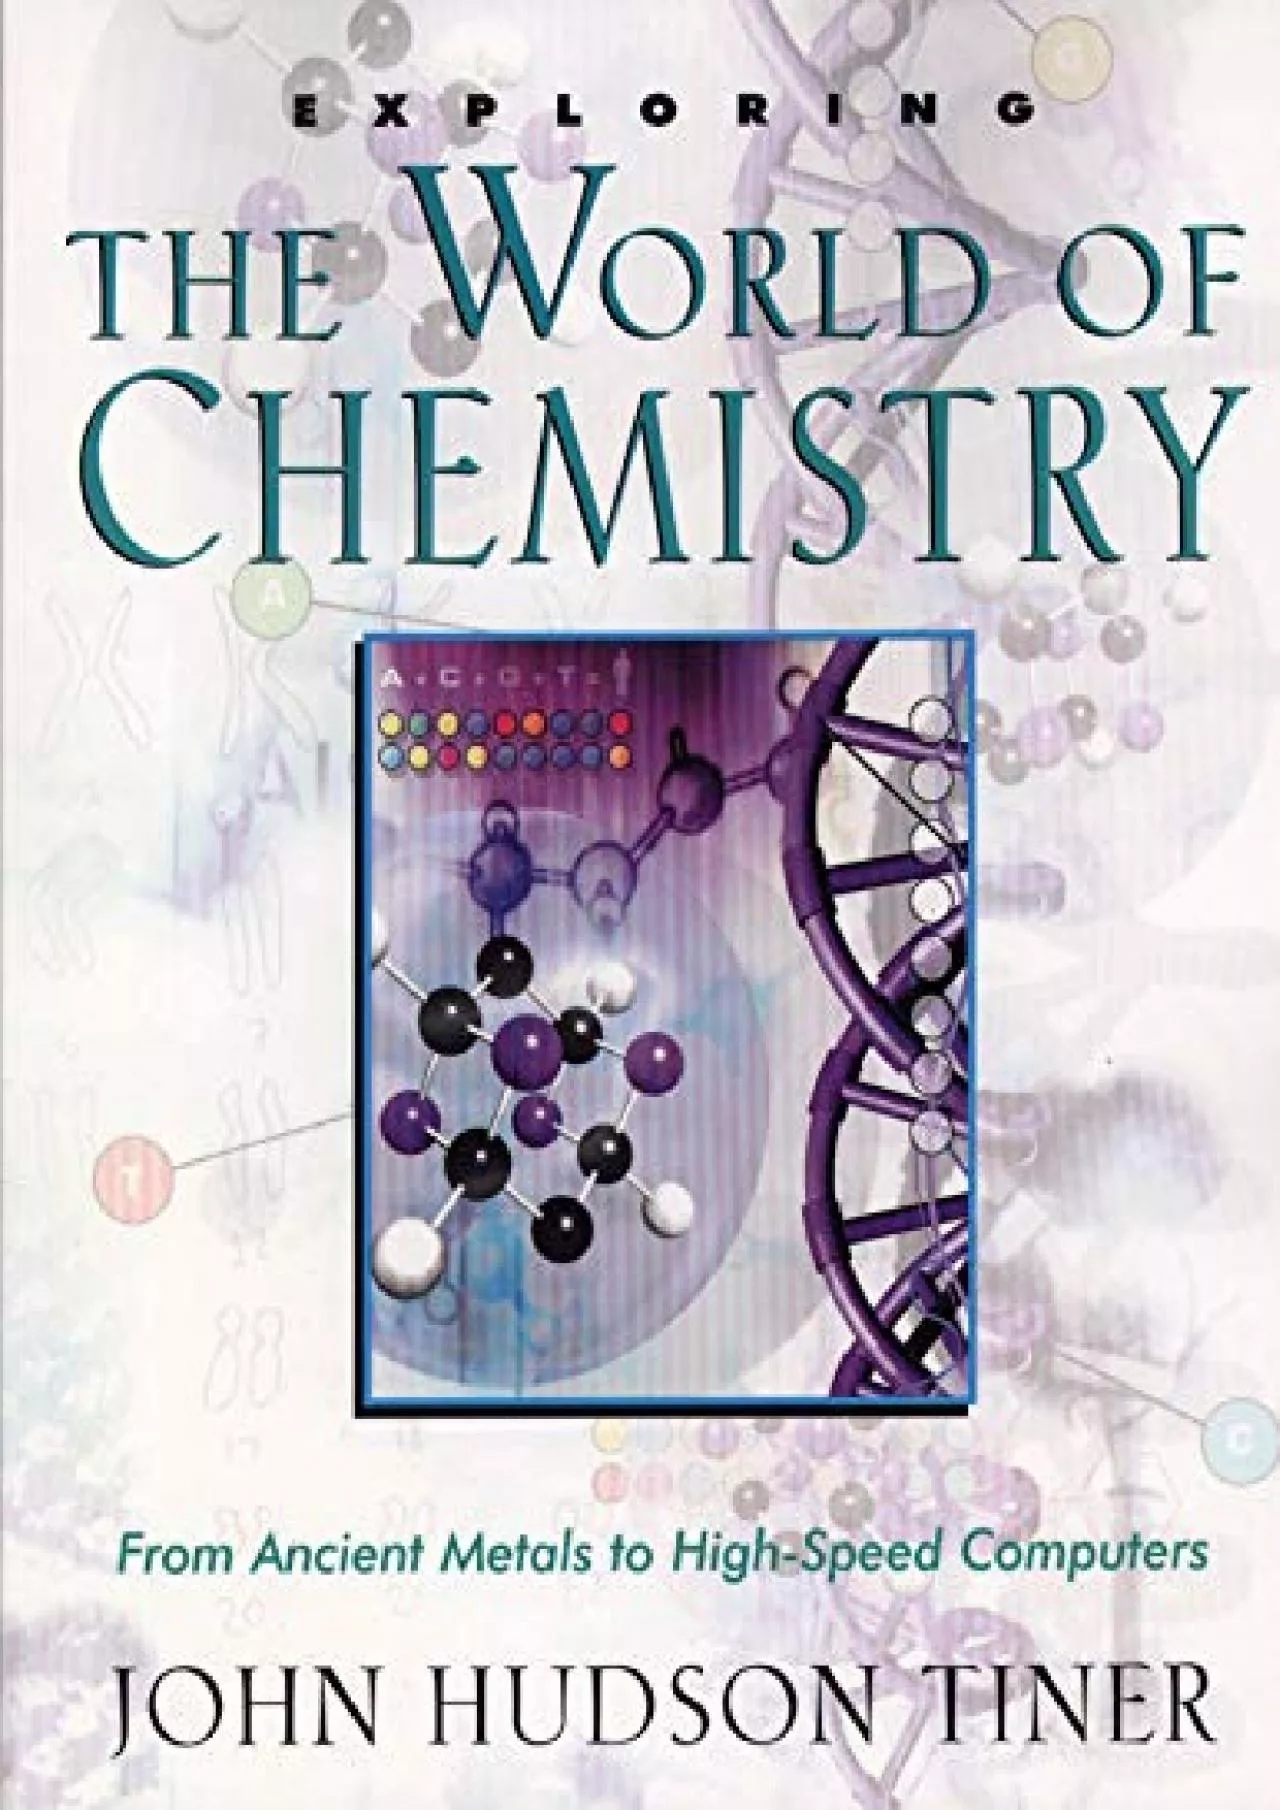 [DOWNLOAD]-Exploring the World of Chemistry: From Ancient Metals to High-Speed Computers